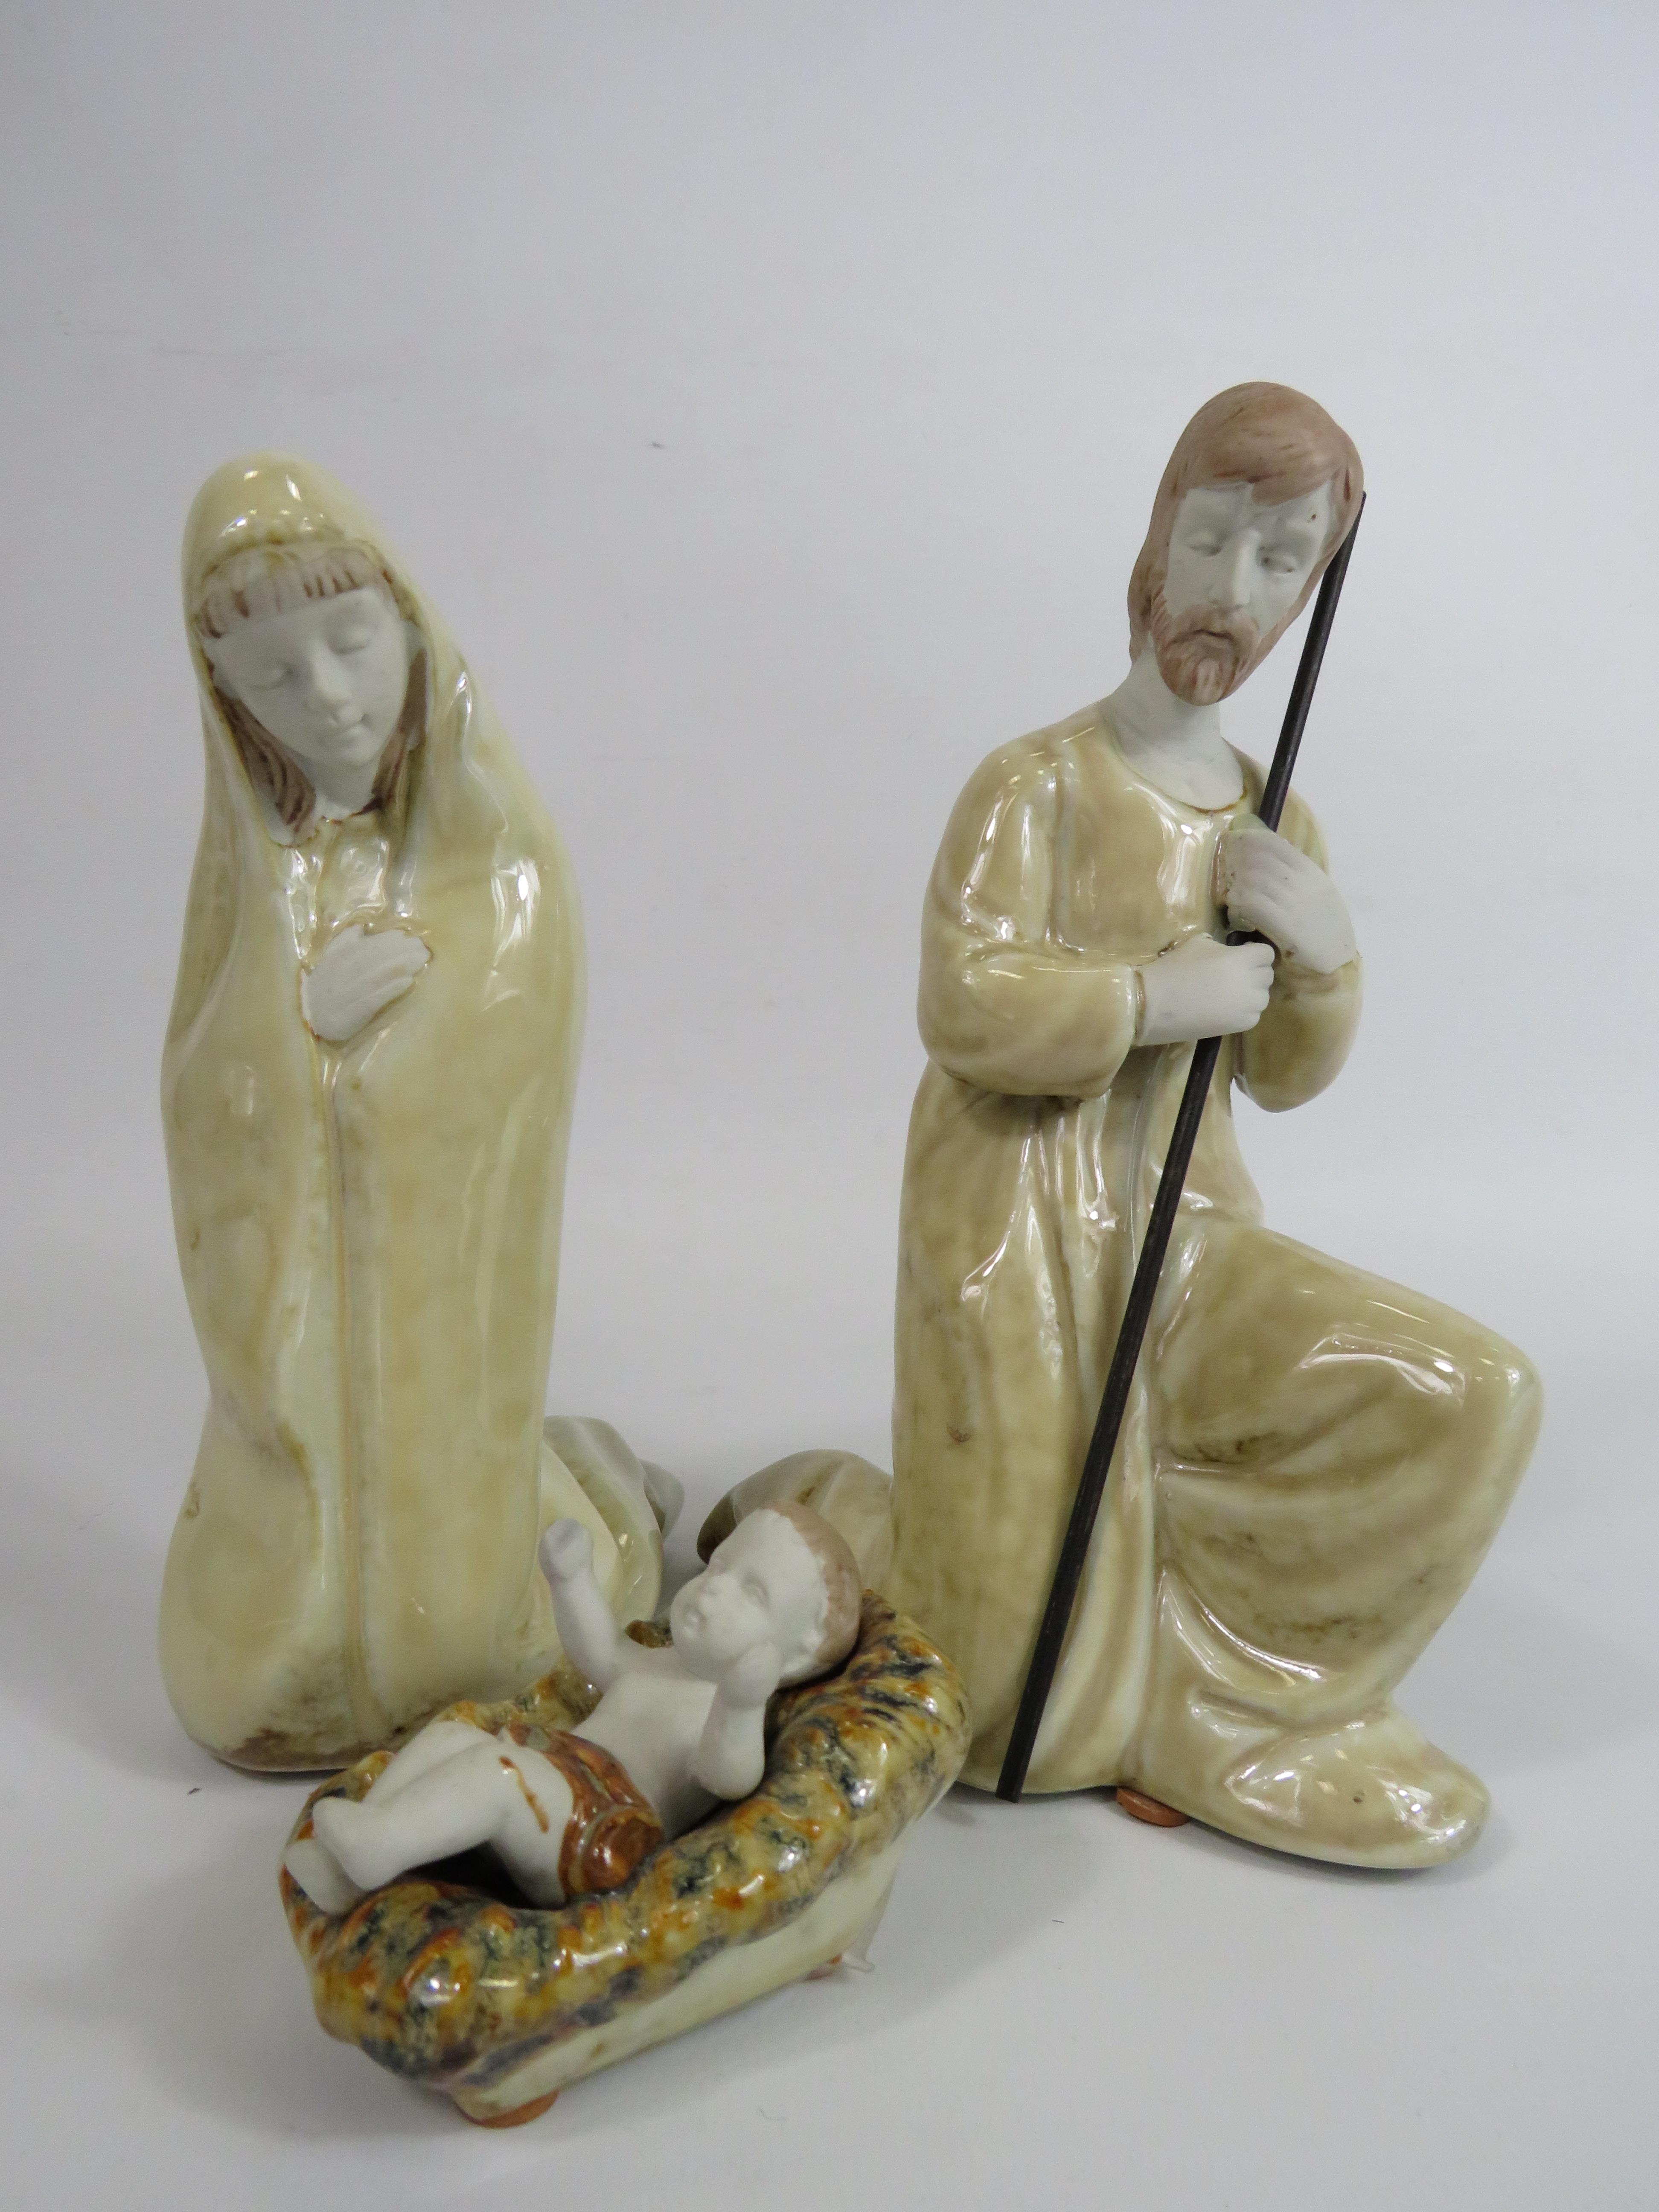 3 Ceramic figurines depiciting Joseph, Mary and Baby Jesus, the tallest stands 19.5cm.